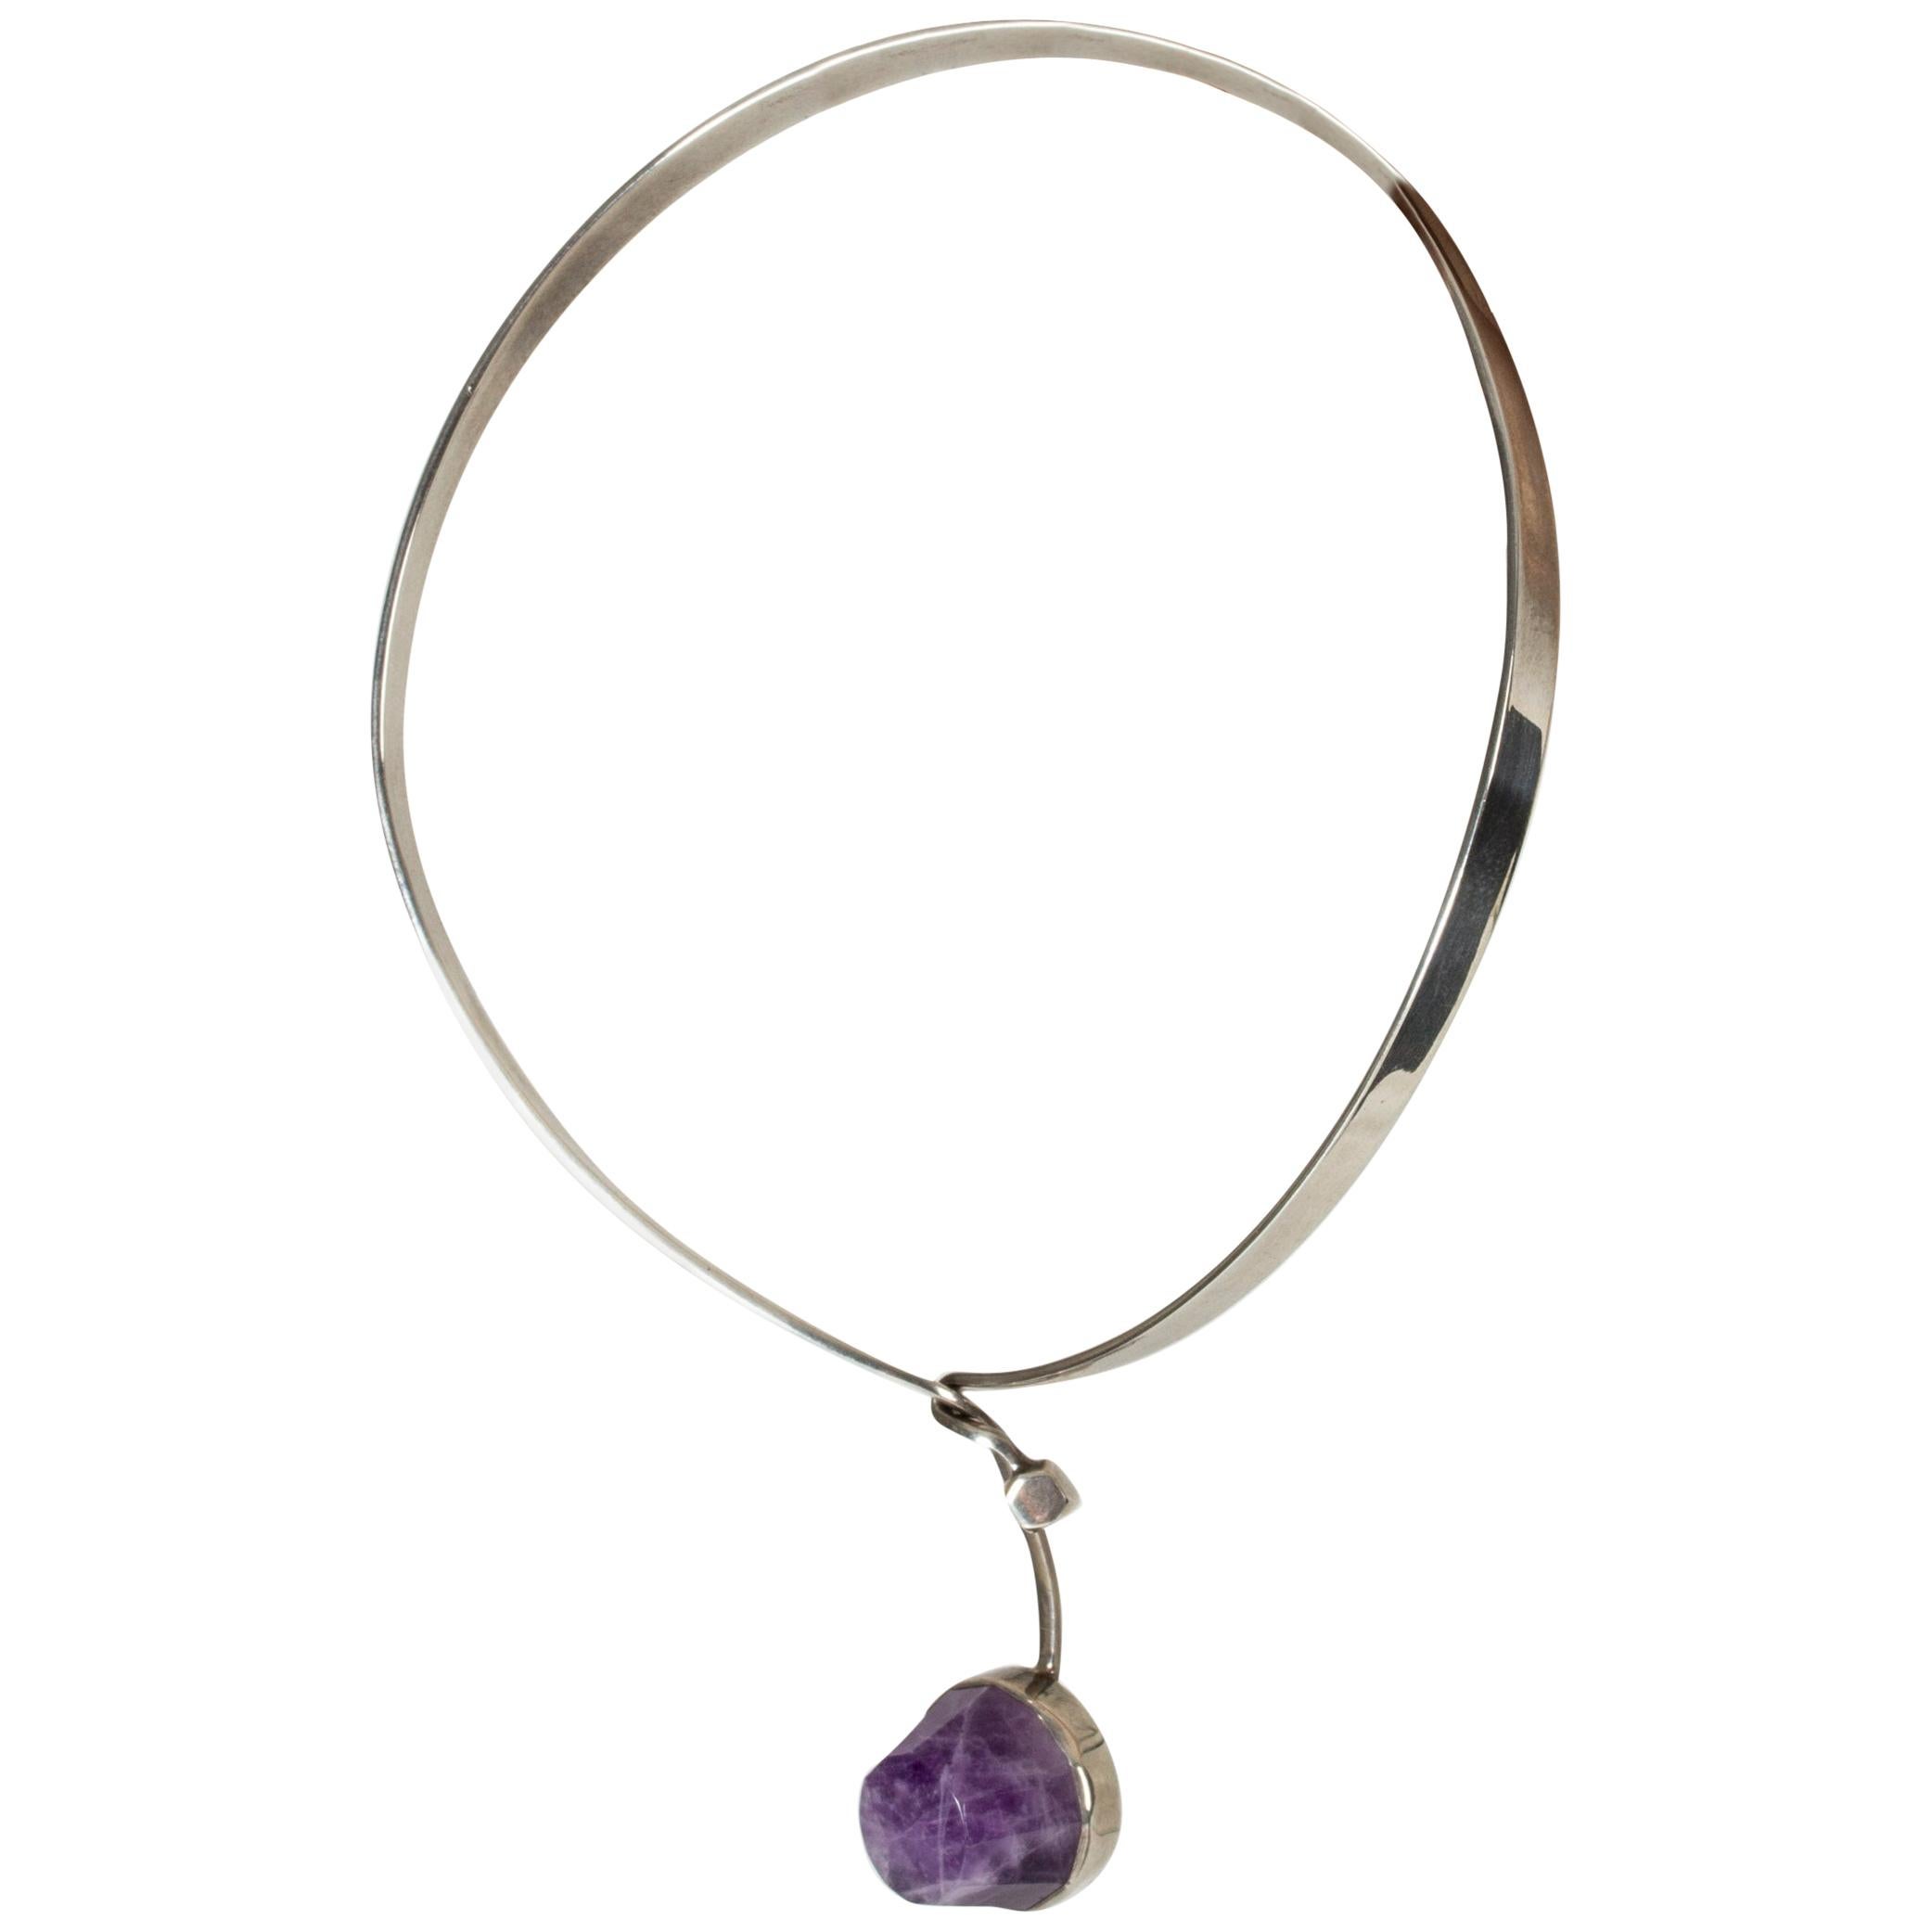 Silver and Amethyst Neckring by Gert Thyself for Gussi, 1967